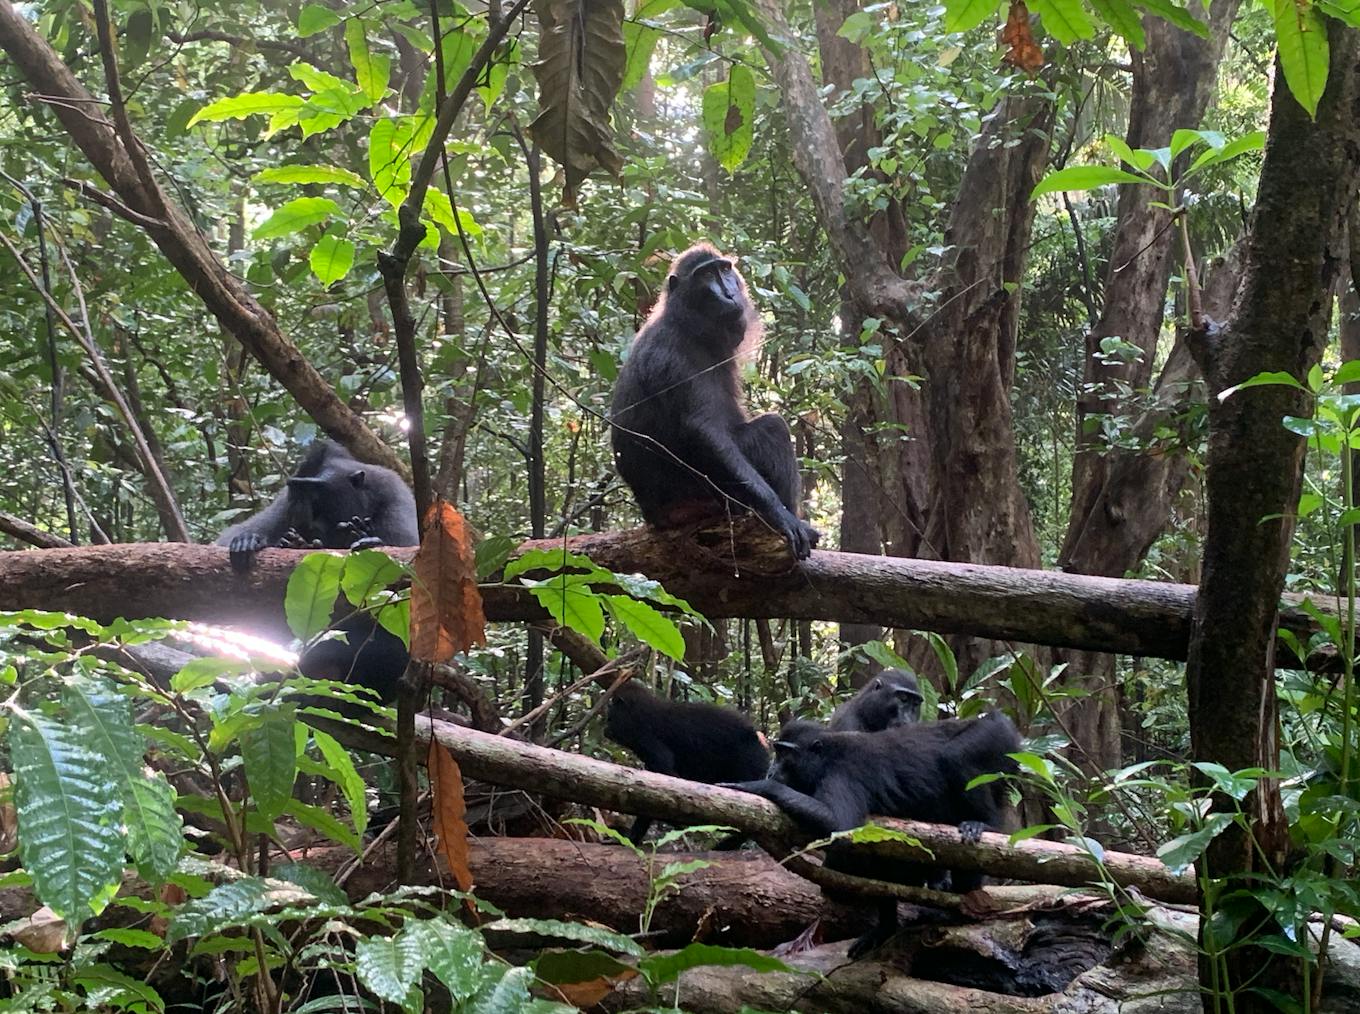 Sulawesi Crested black macaques